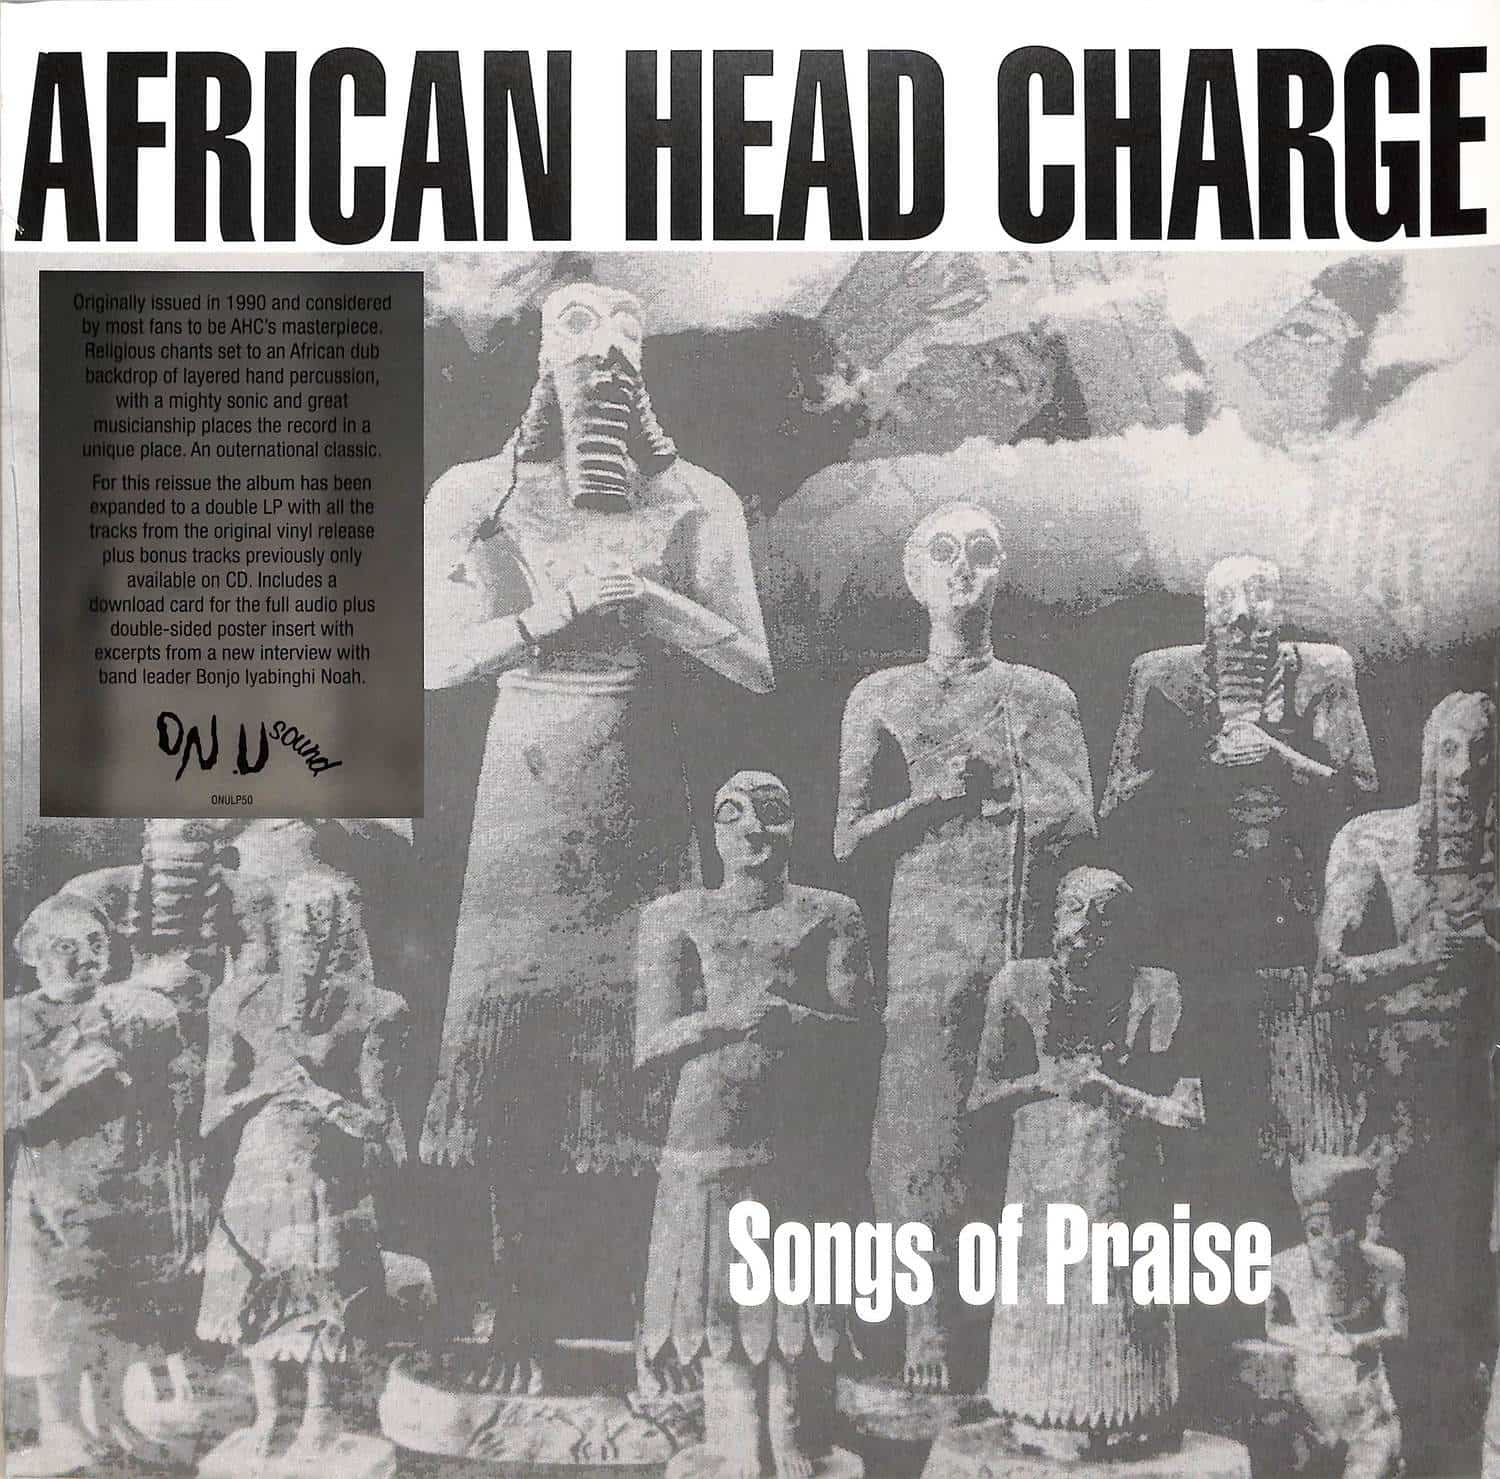 African Head Charge - SONGS OF PRAISE 